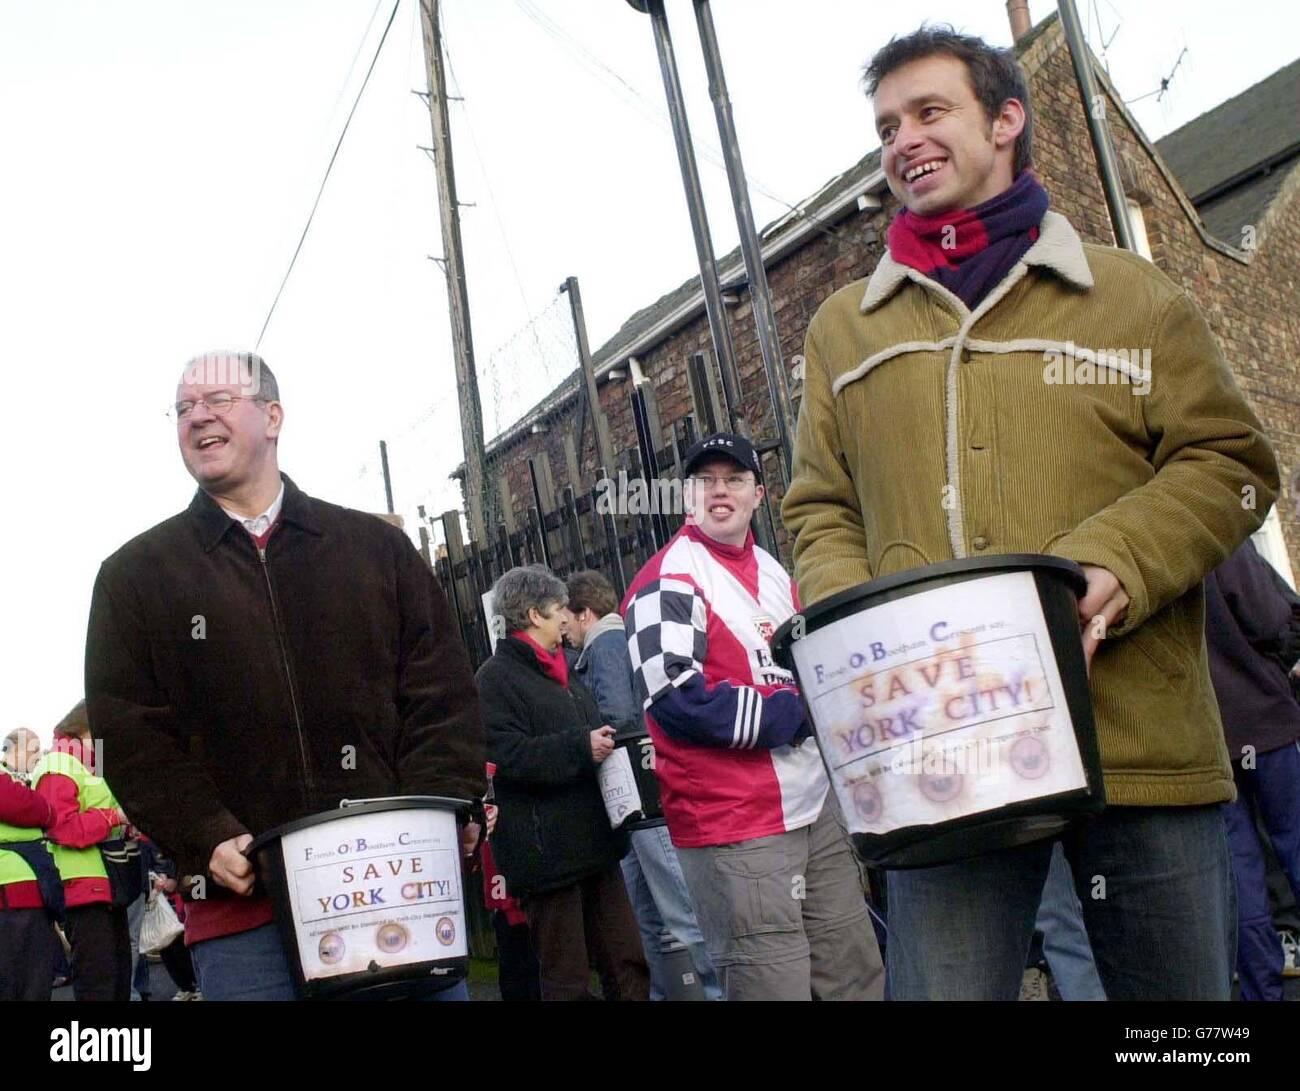 A York City supporters raises cash in an attempt to prolong the life of the cash-strapped club before their Nationwide Division Three match against Swansea at Bootham Crescent. NO UNOFFICIAL CLUB WEBSITE USE. Stock Photo